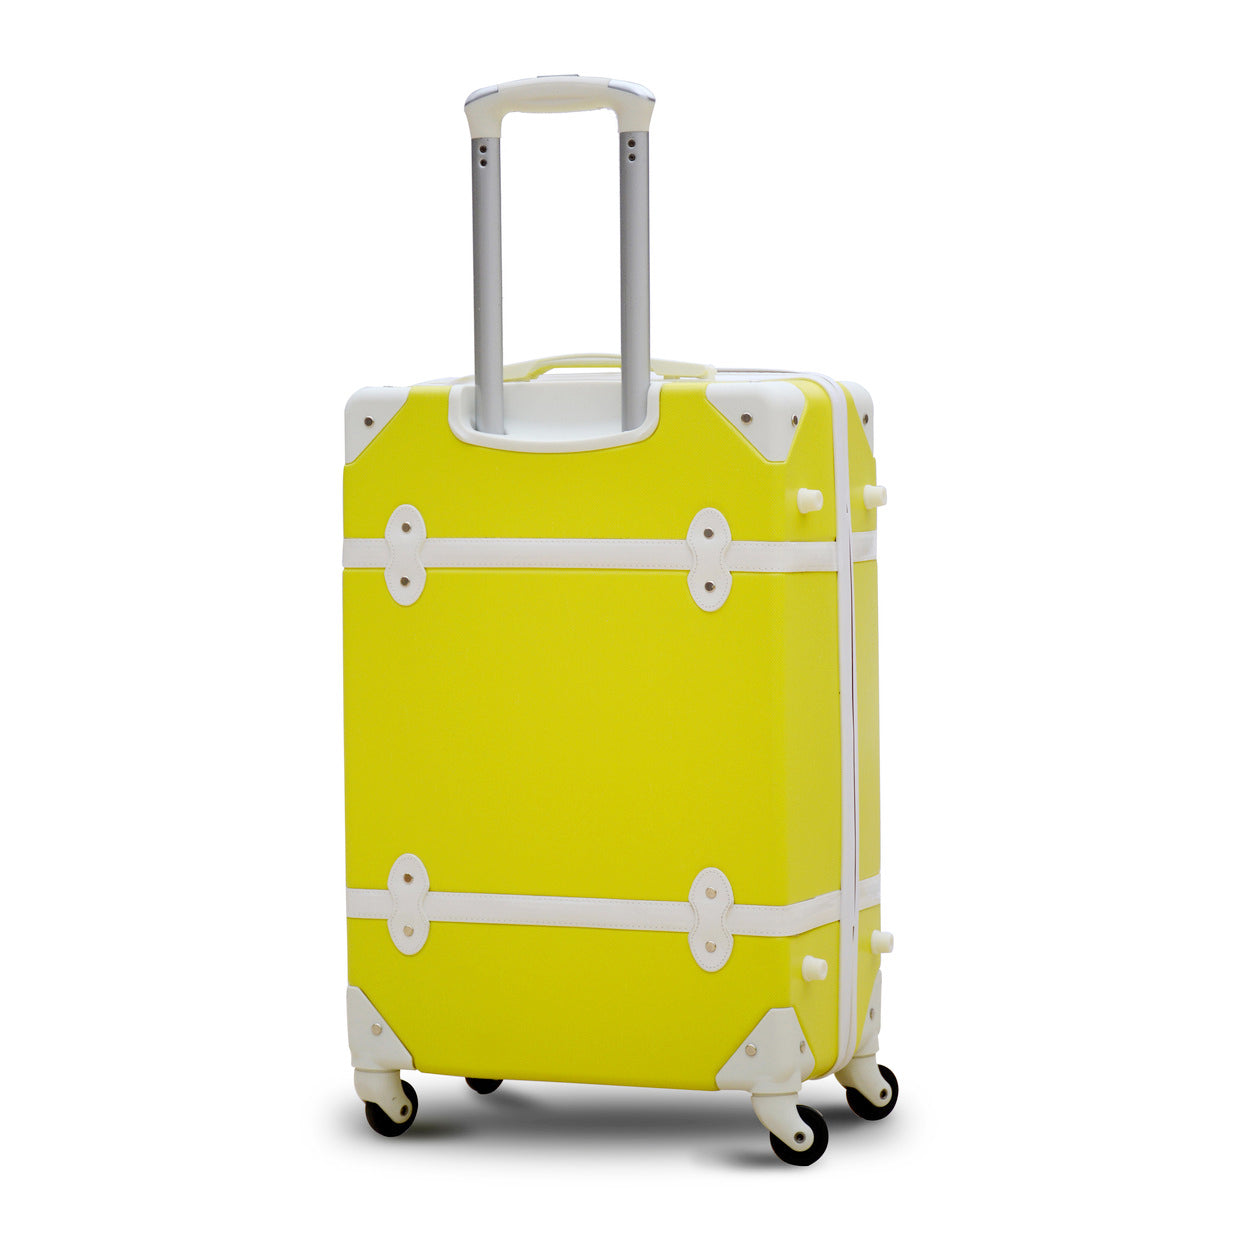 24 Inches Corner Guard Lightweight ABS Luggage Yellow Colour | Hard Case Spinner Wheel Trolley Bag